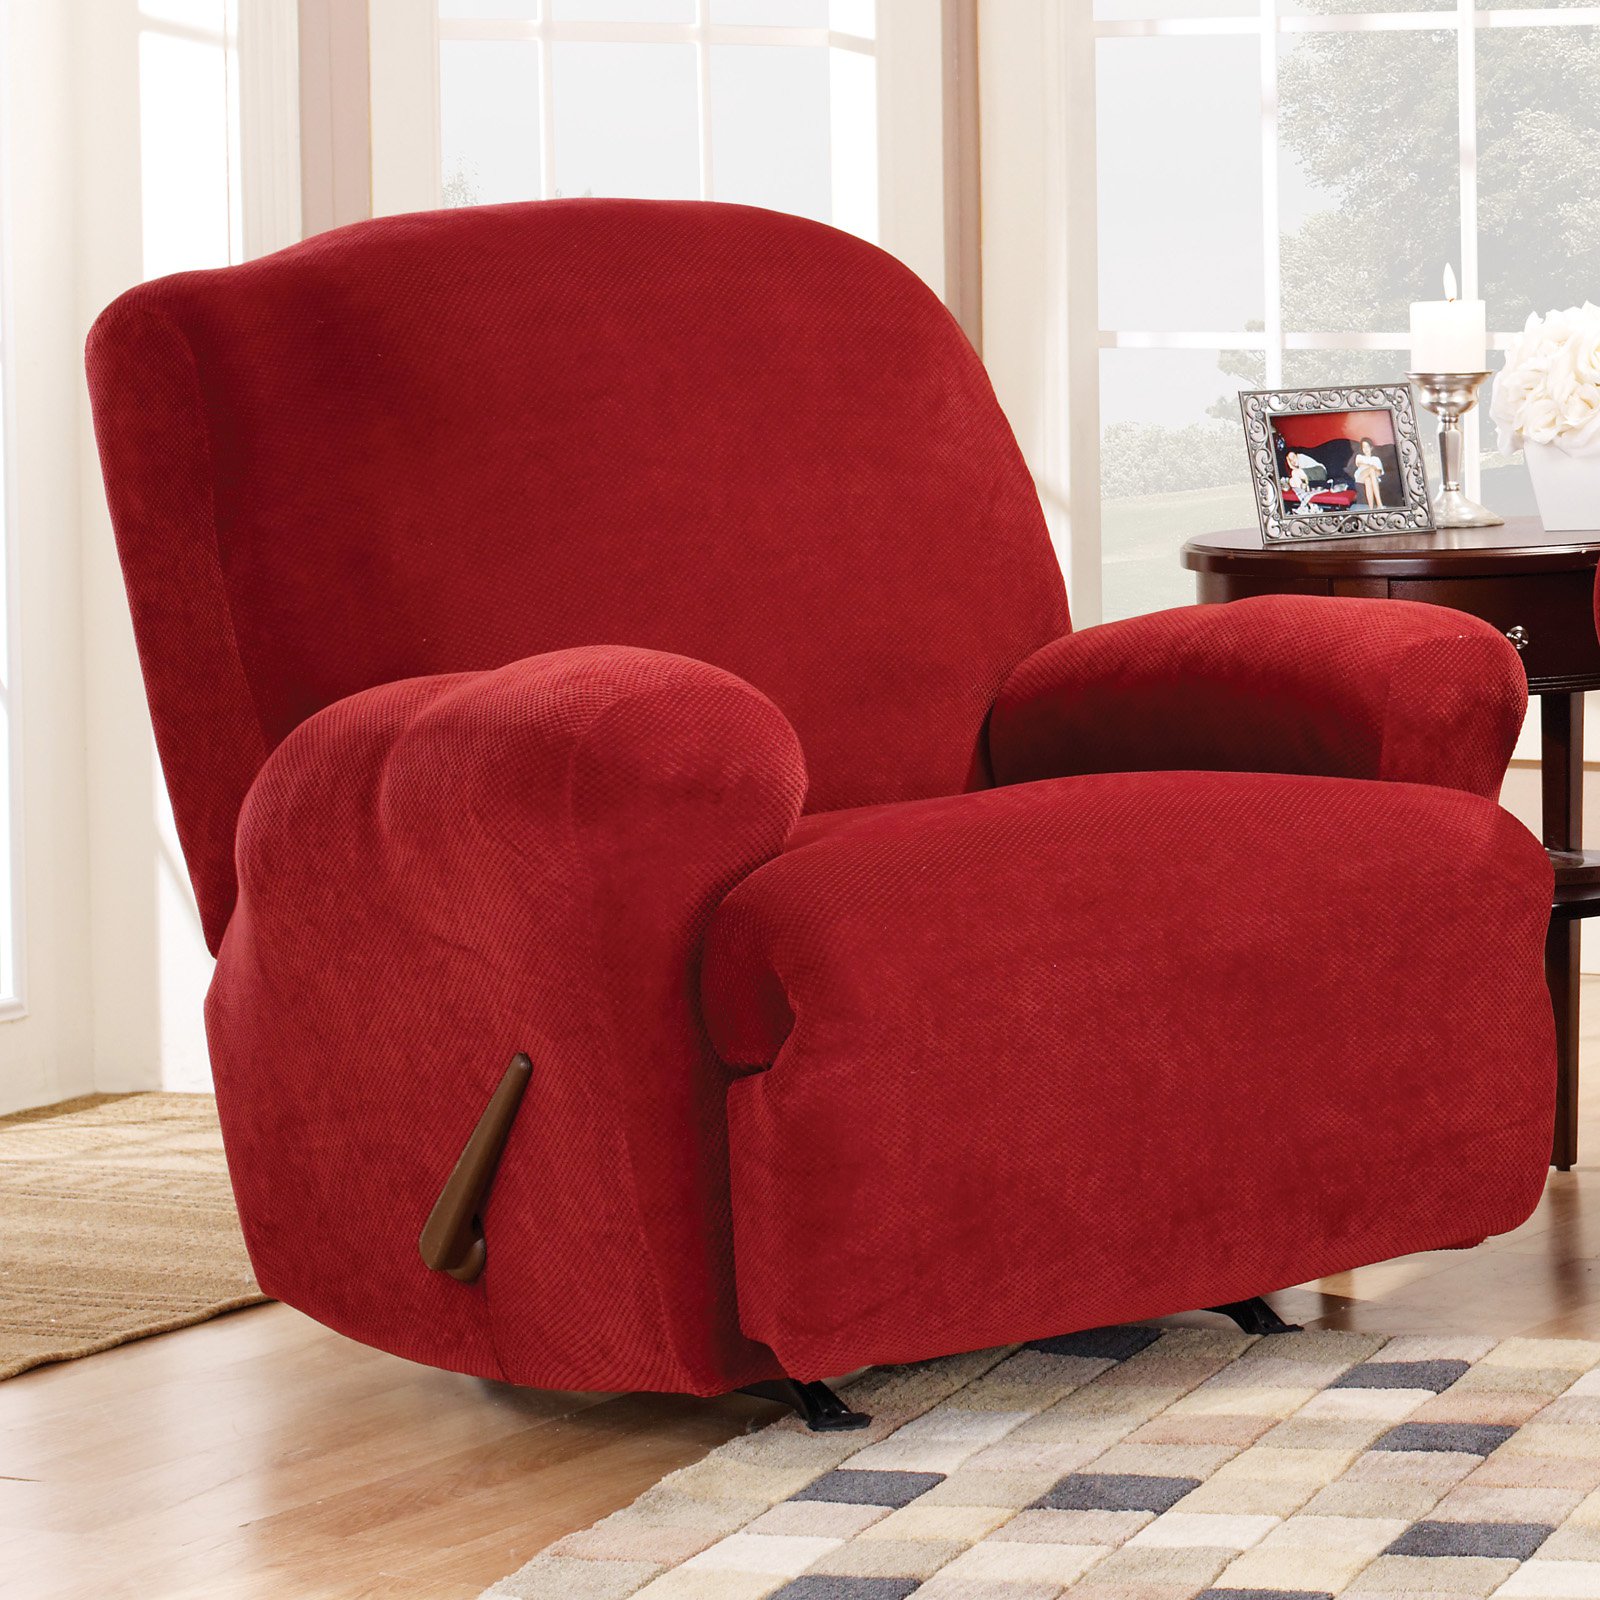 SureFit  Stretch Pique Lift Recliner Slipcover Chocolate - image 2 of 2